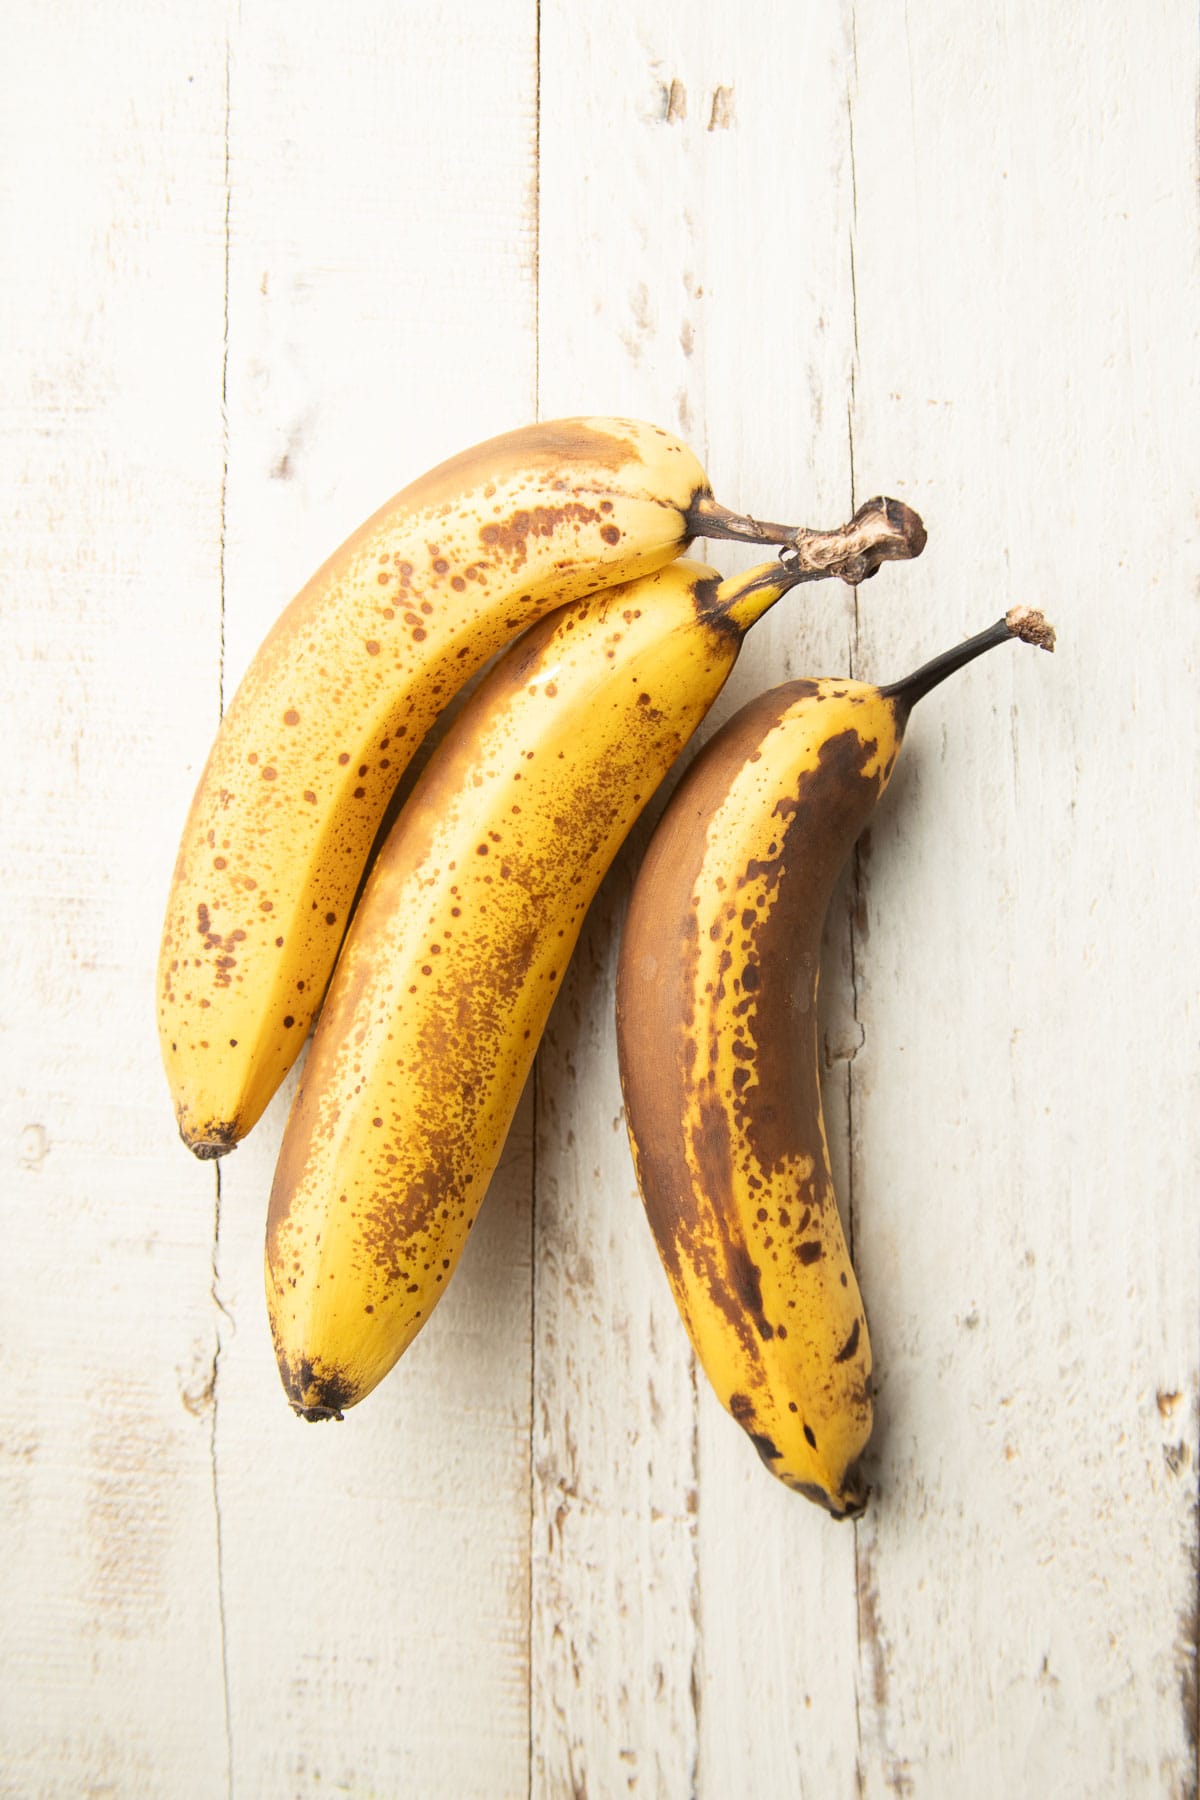 Three overripe bananas on a white wooden surface.